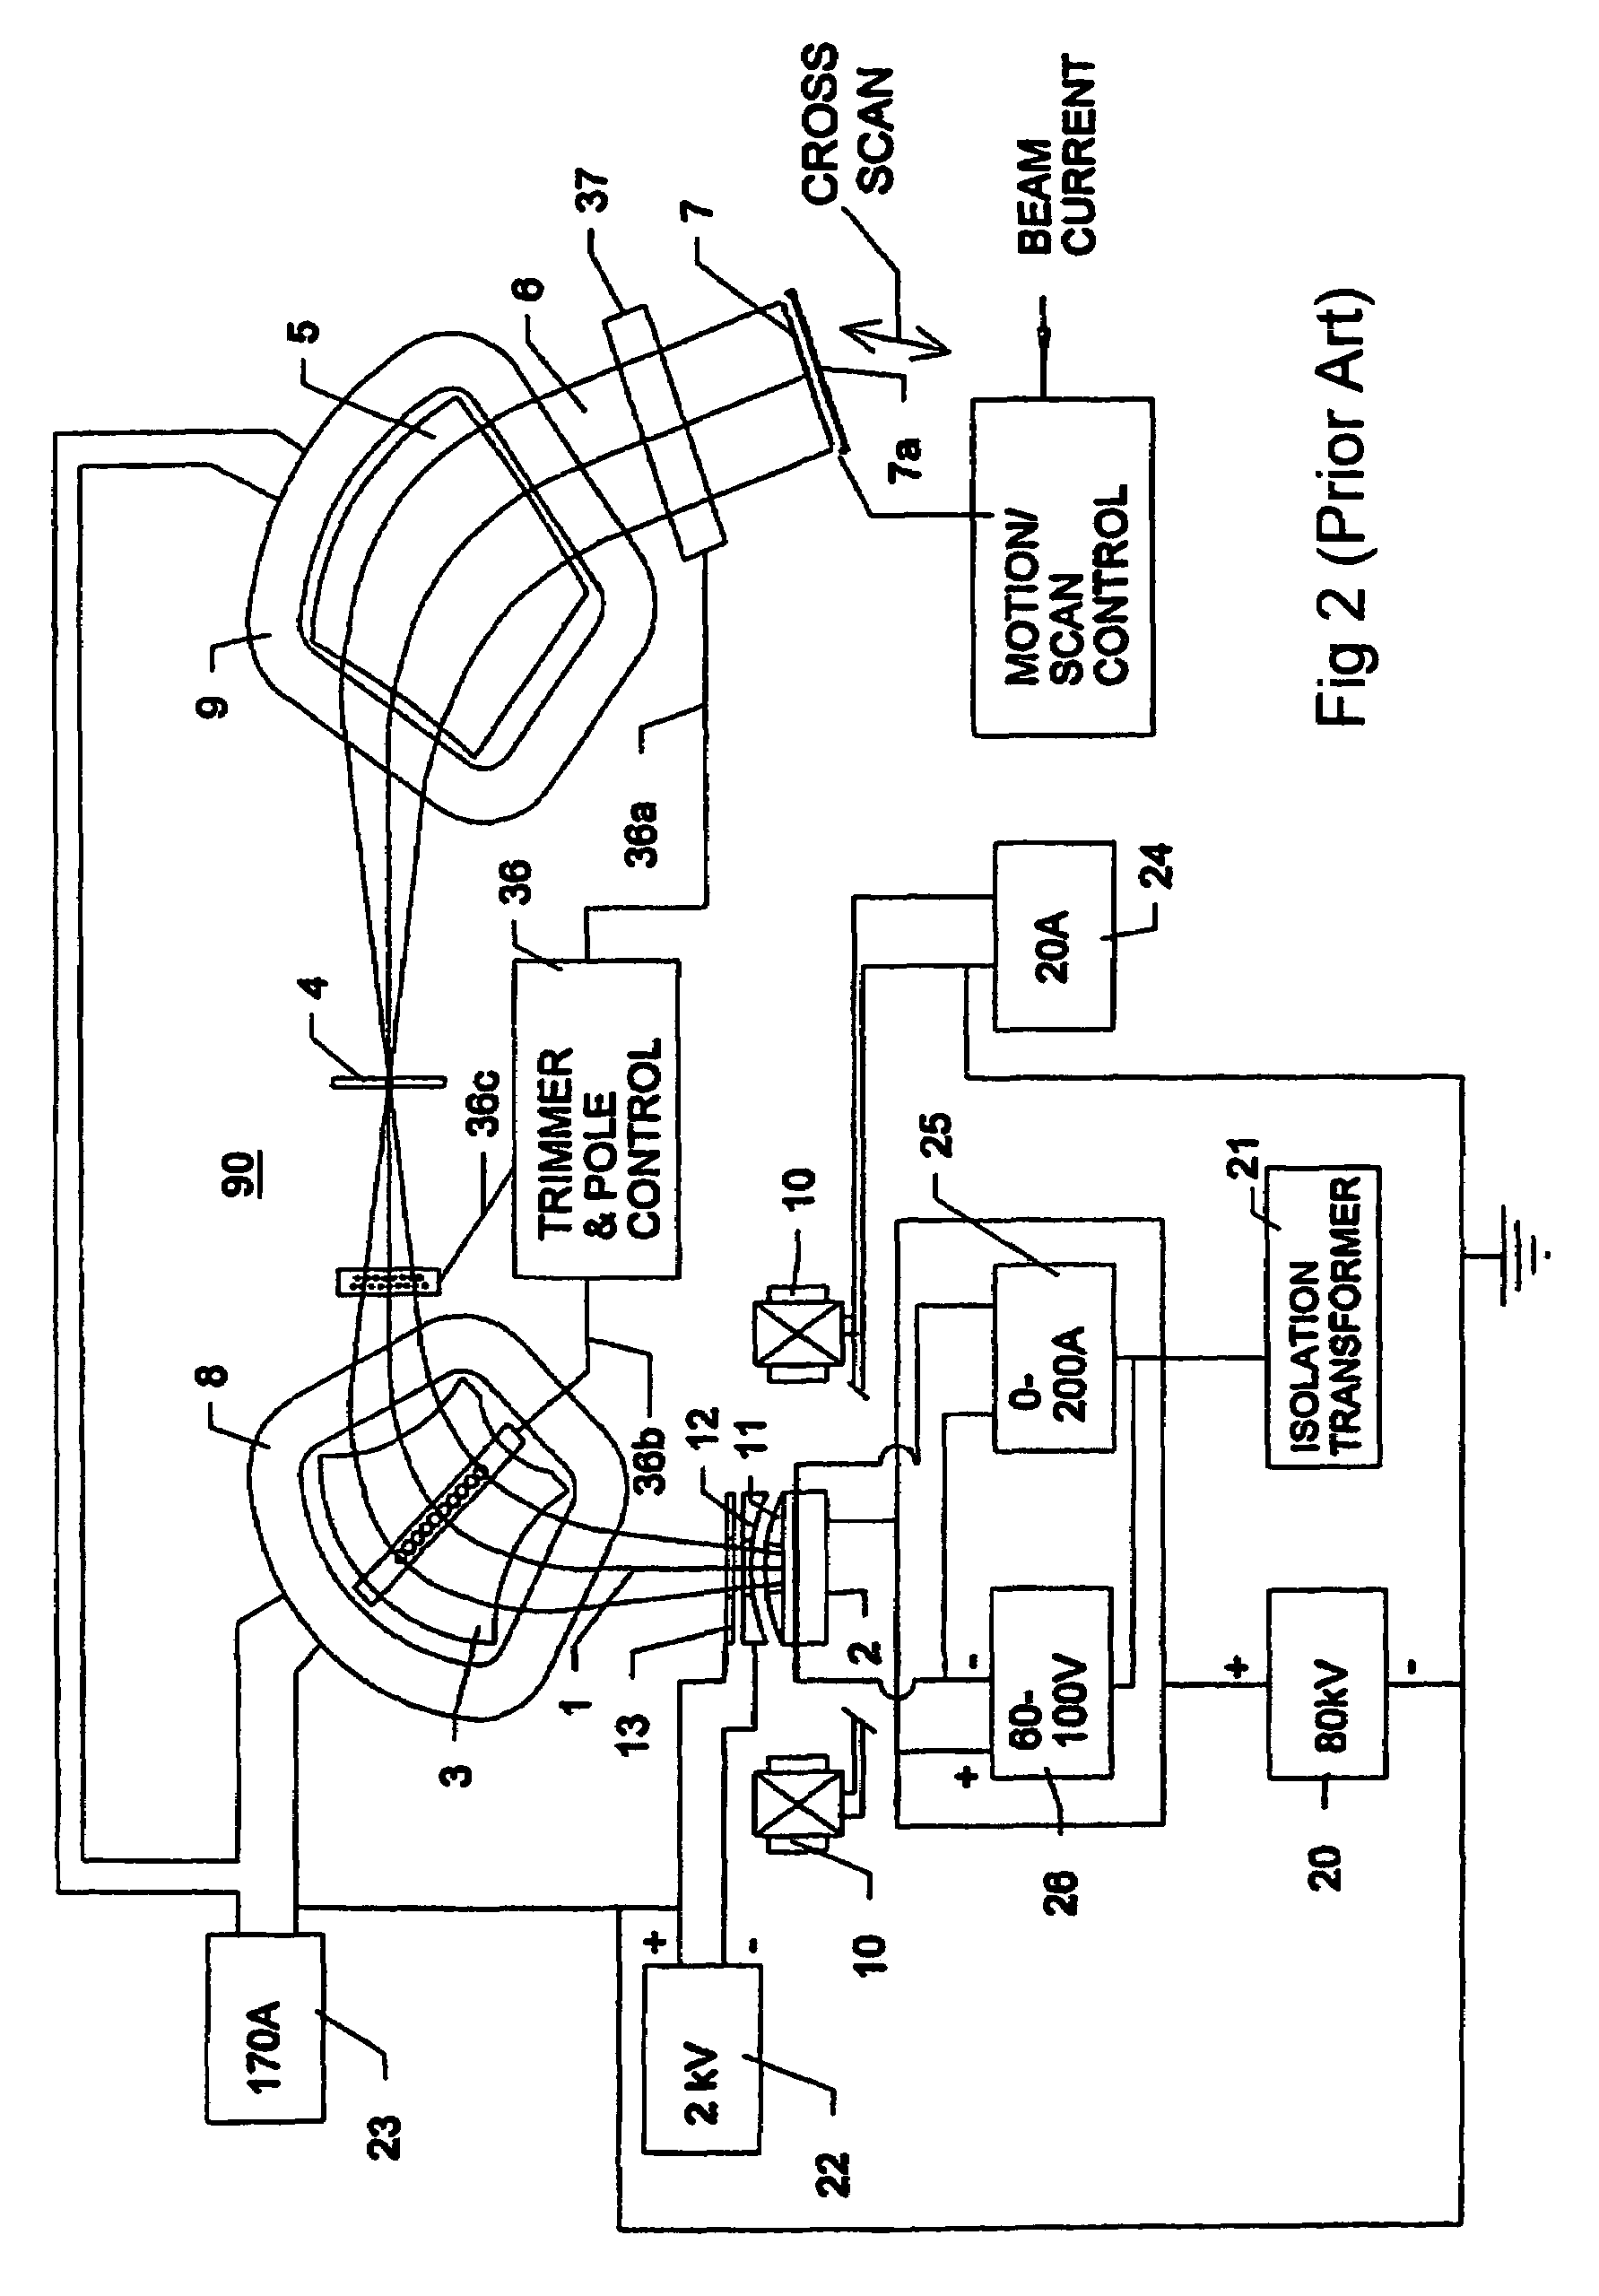 Apparatus and methods for ion beam implantation using ribbon and spot beams